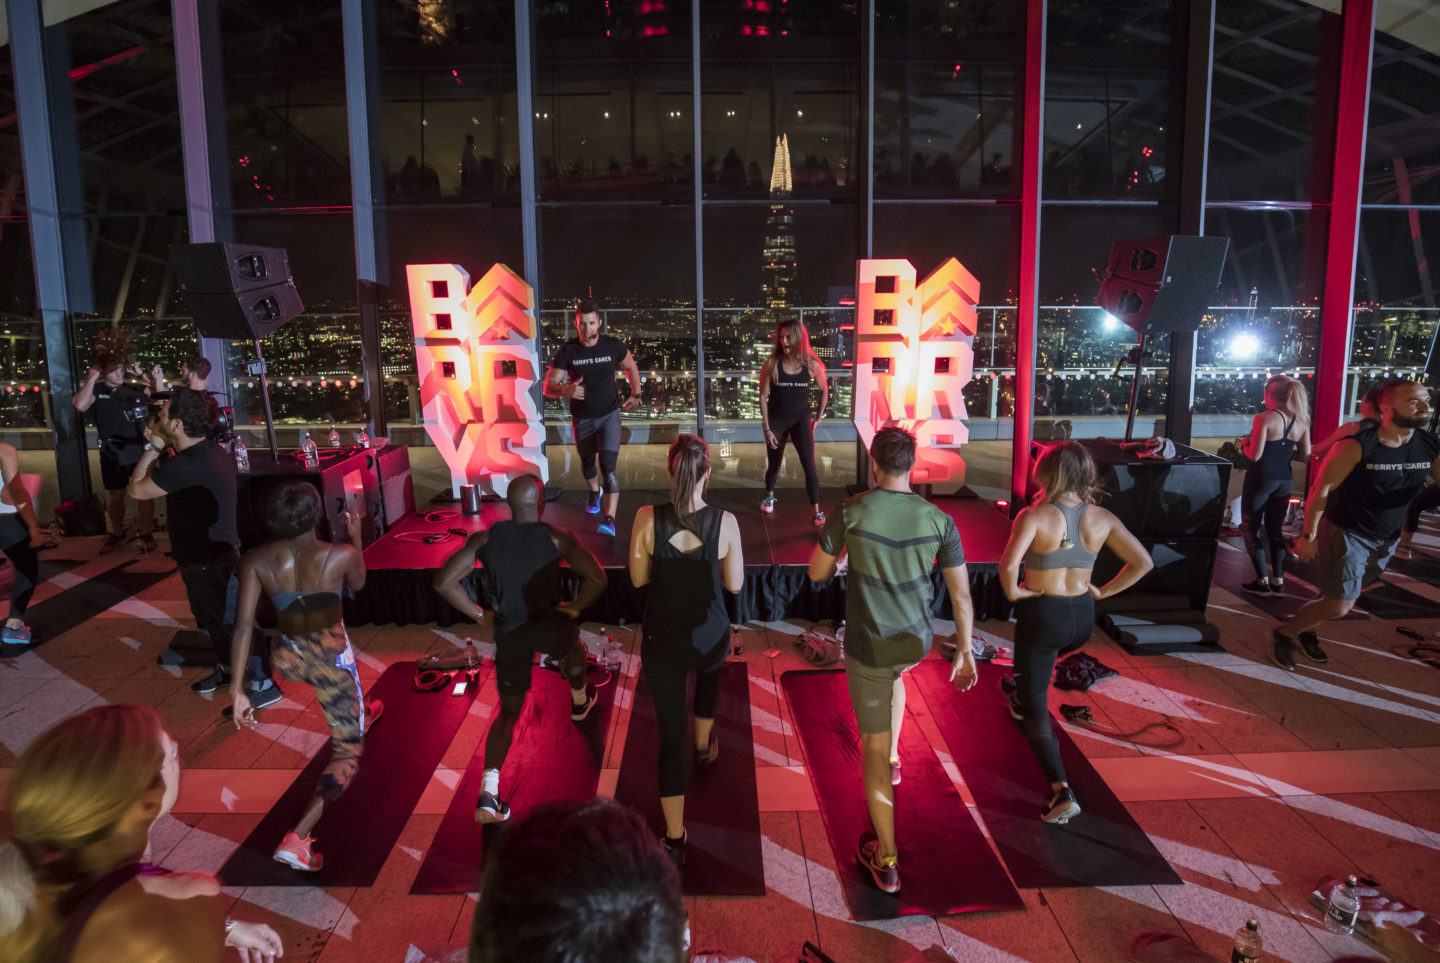 Barry's Bootcamp London Sky Garden participants following instructors doing fitness moves on stage